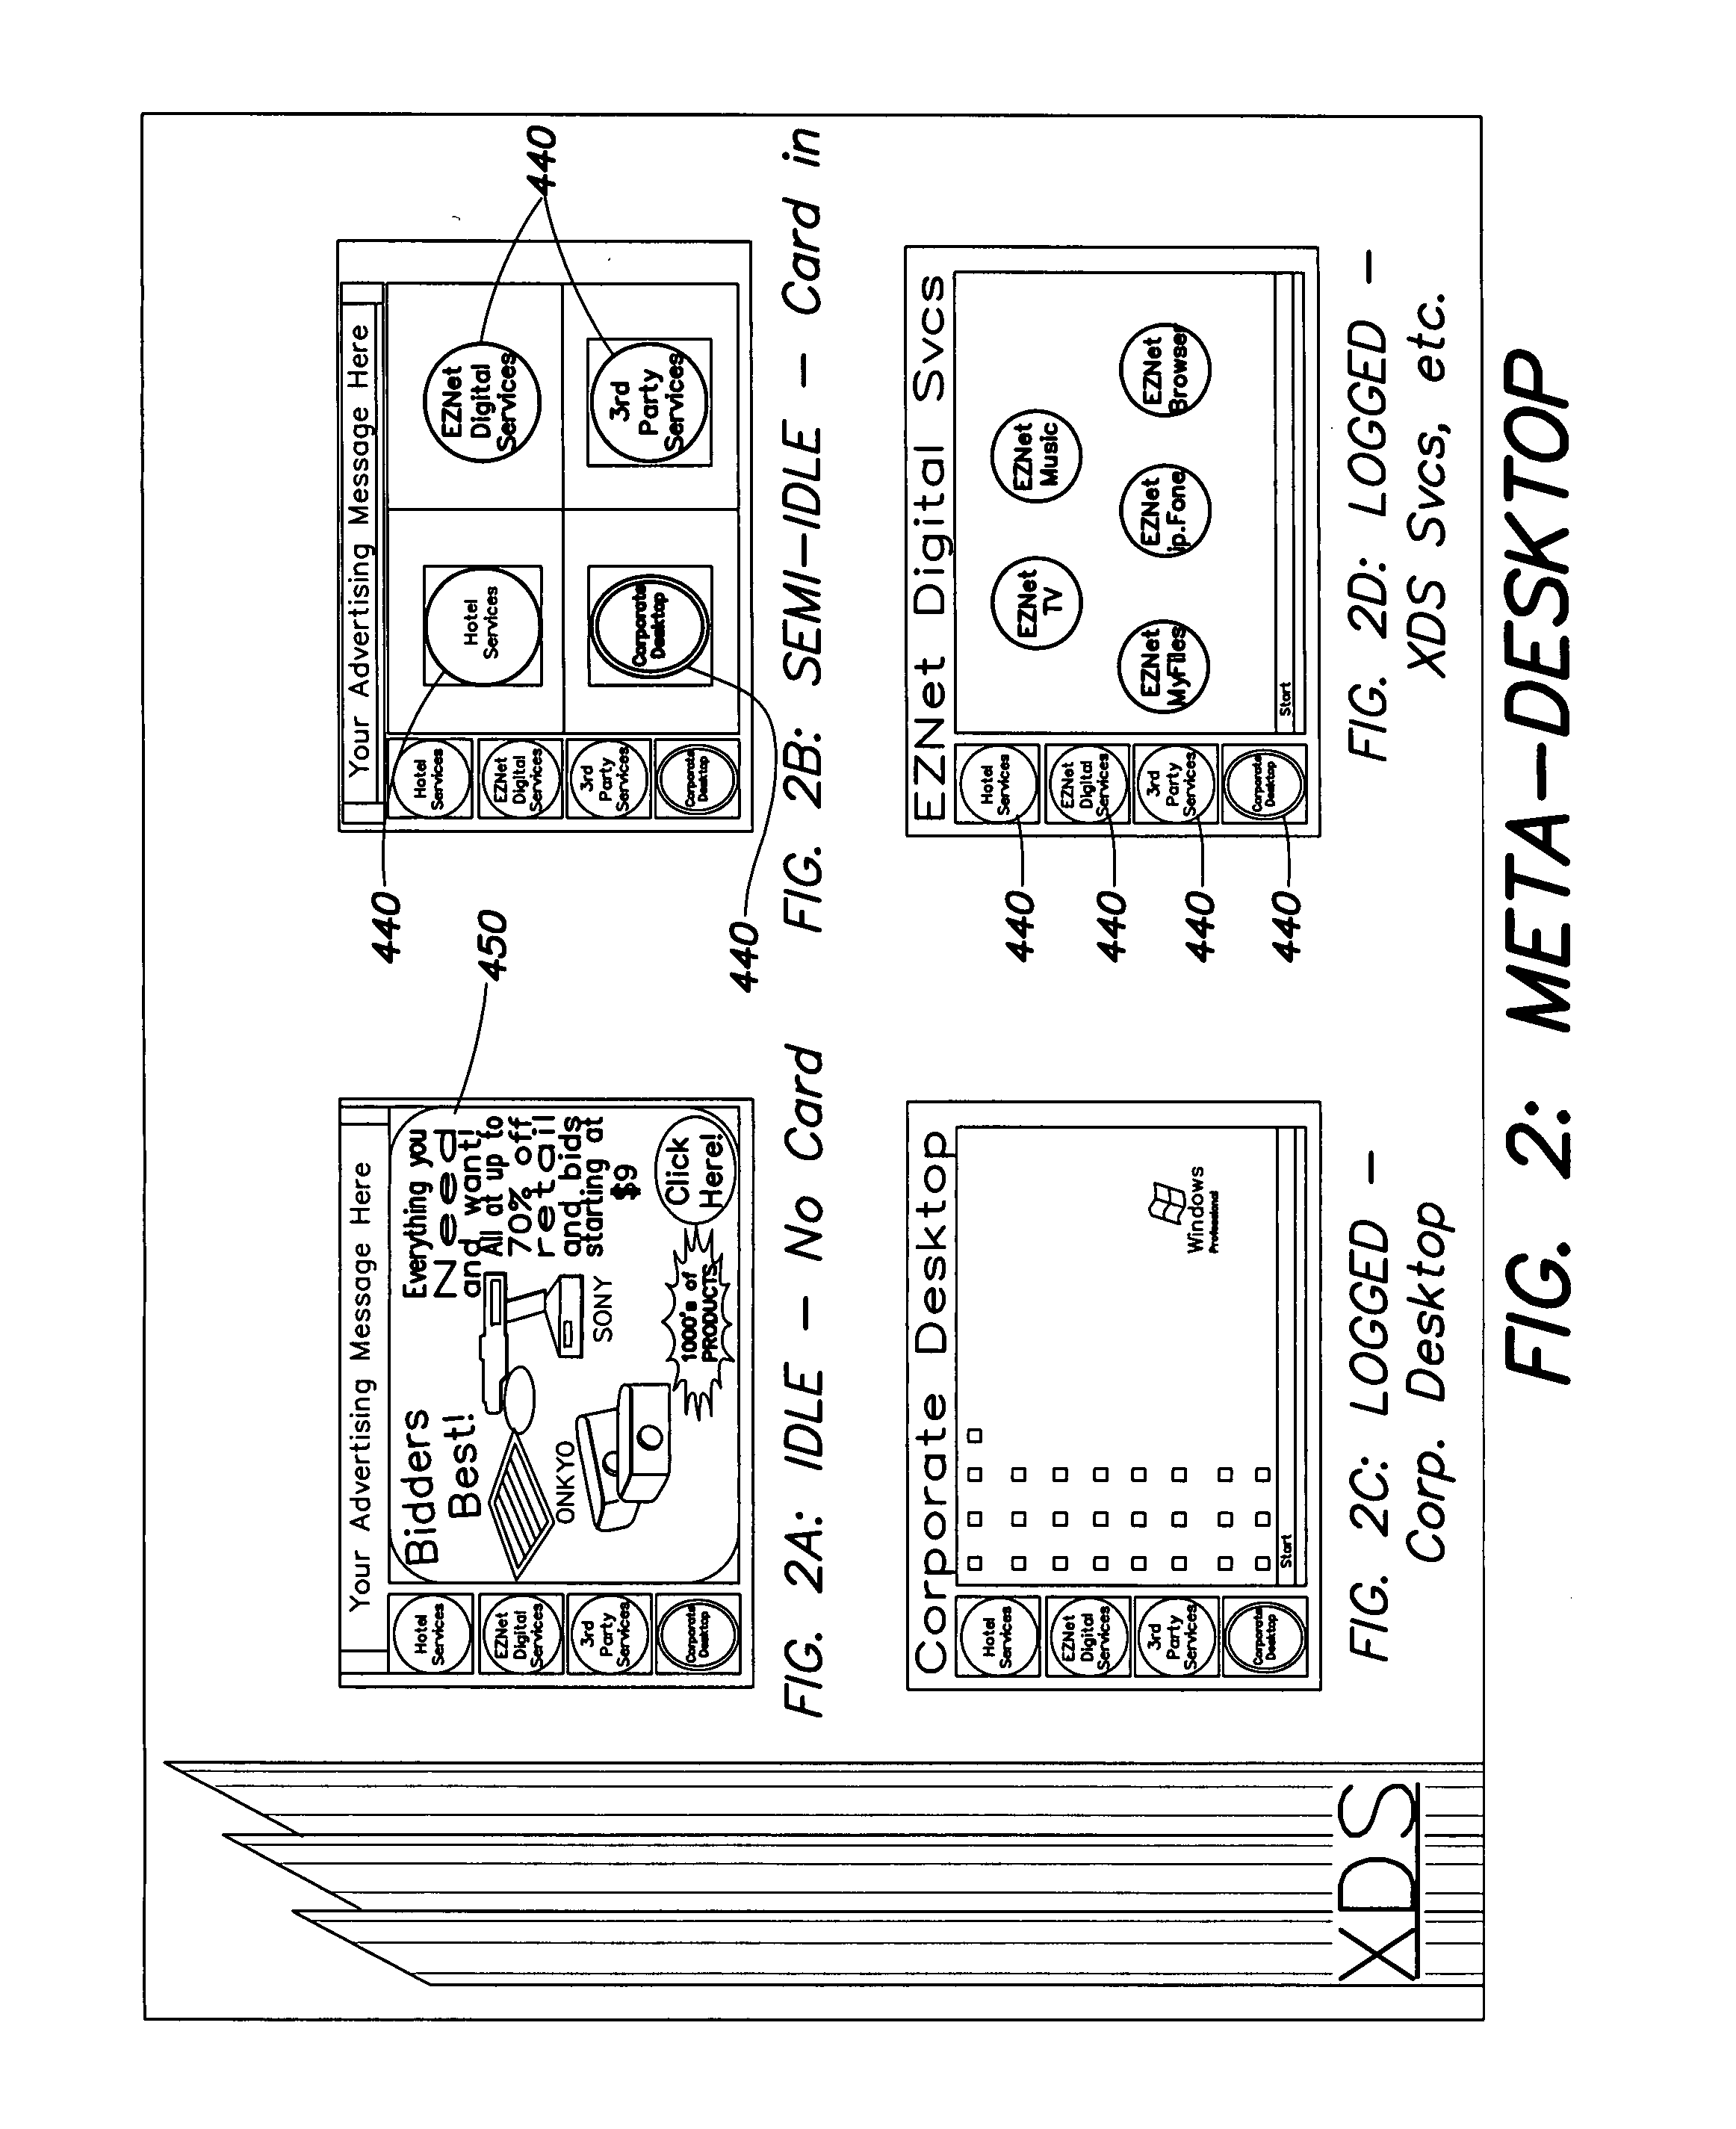 System and method for provisioning universal stateless digital and computing services